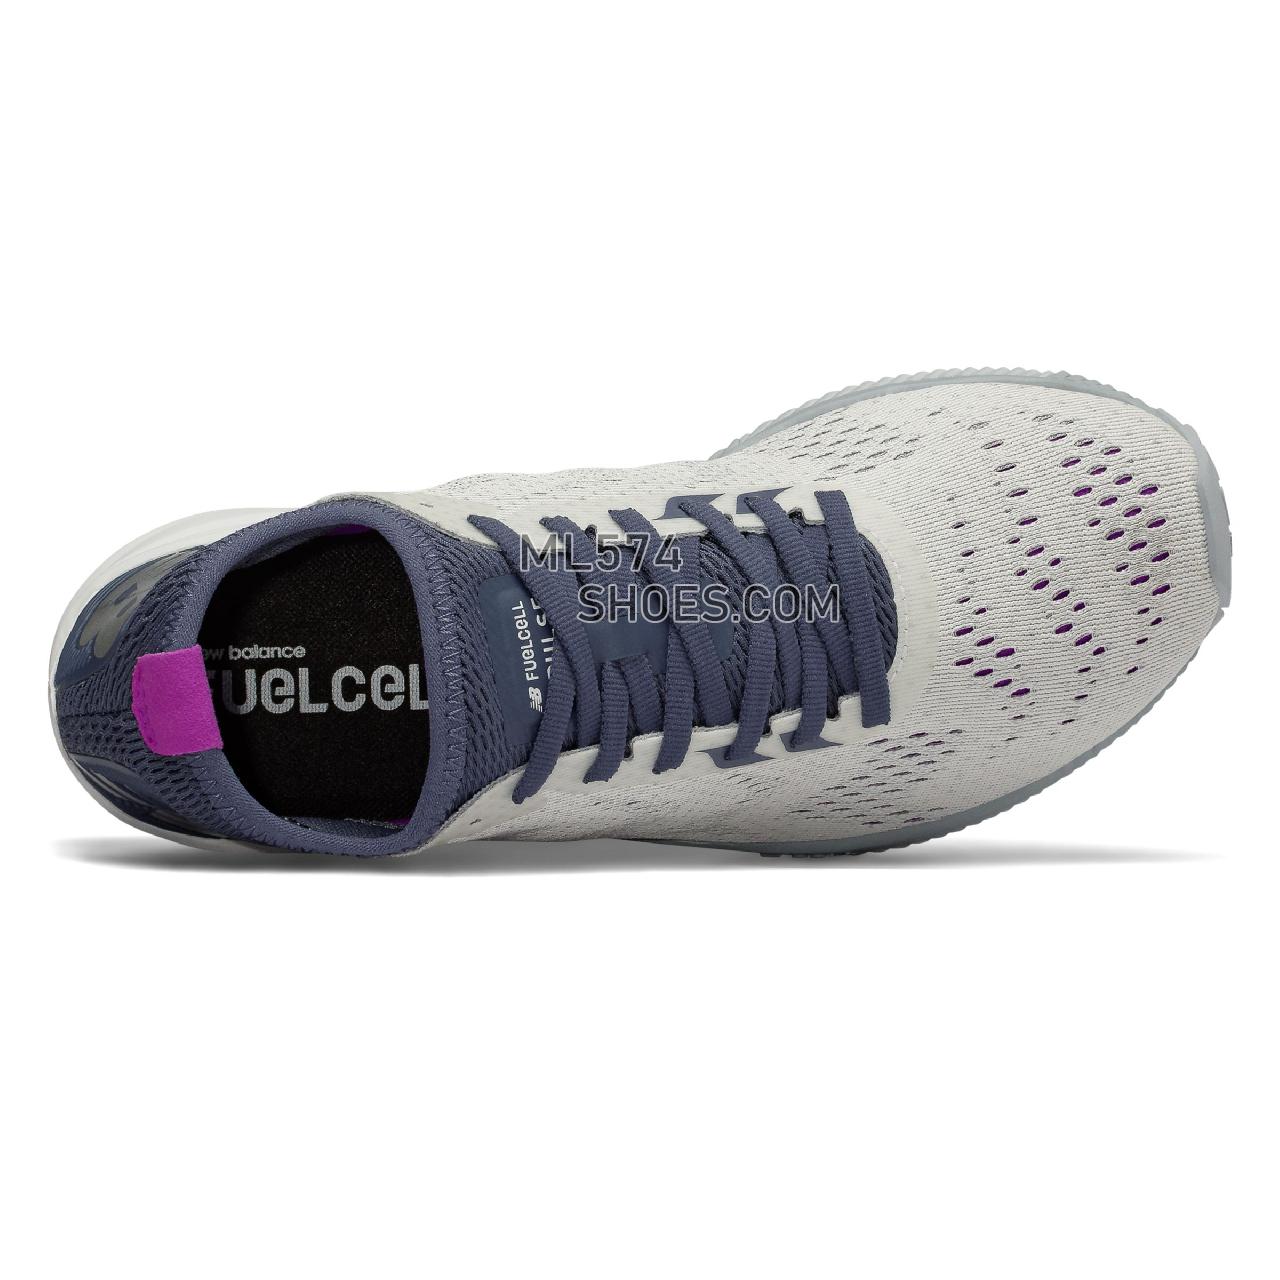 New Balance FuelCell Impulse - Women's FuelCell Impulse Running - White with Voltage Violet and Light Cyclone - WFCIMWP